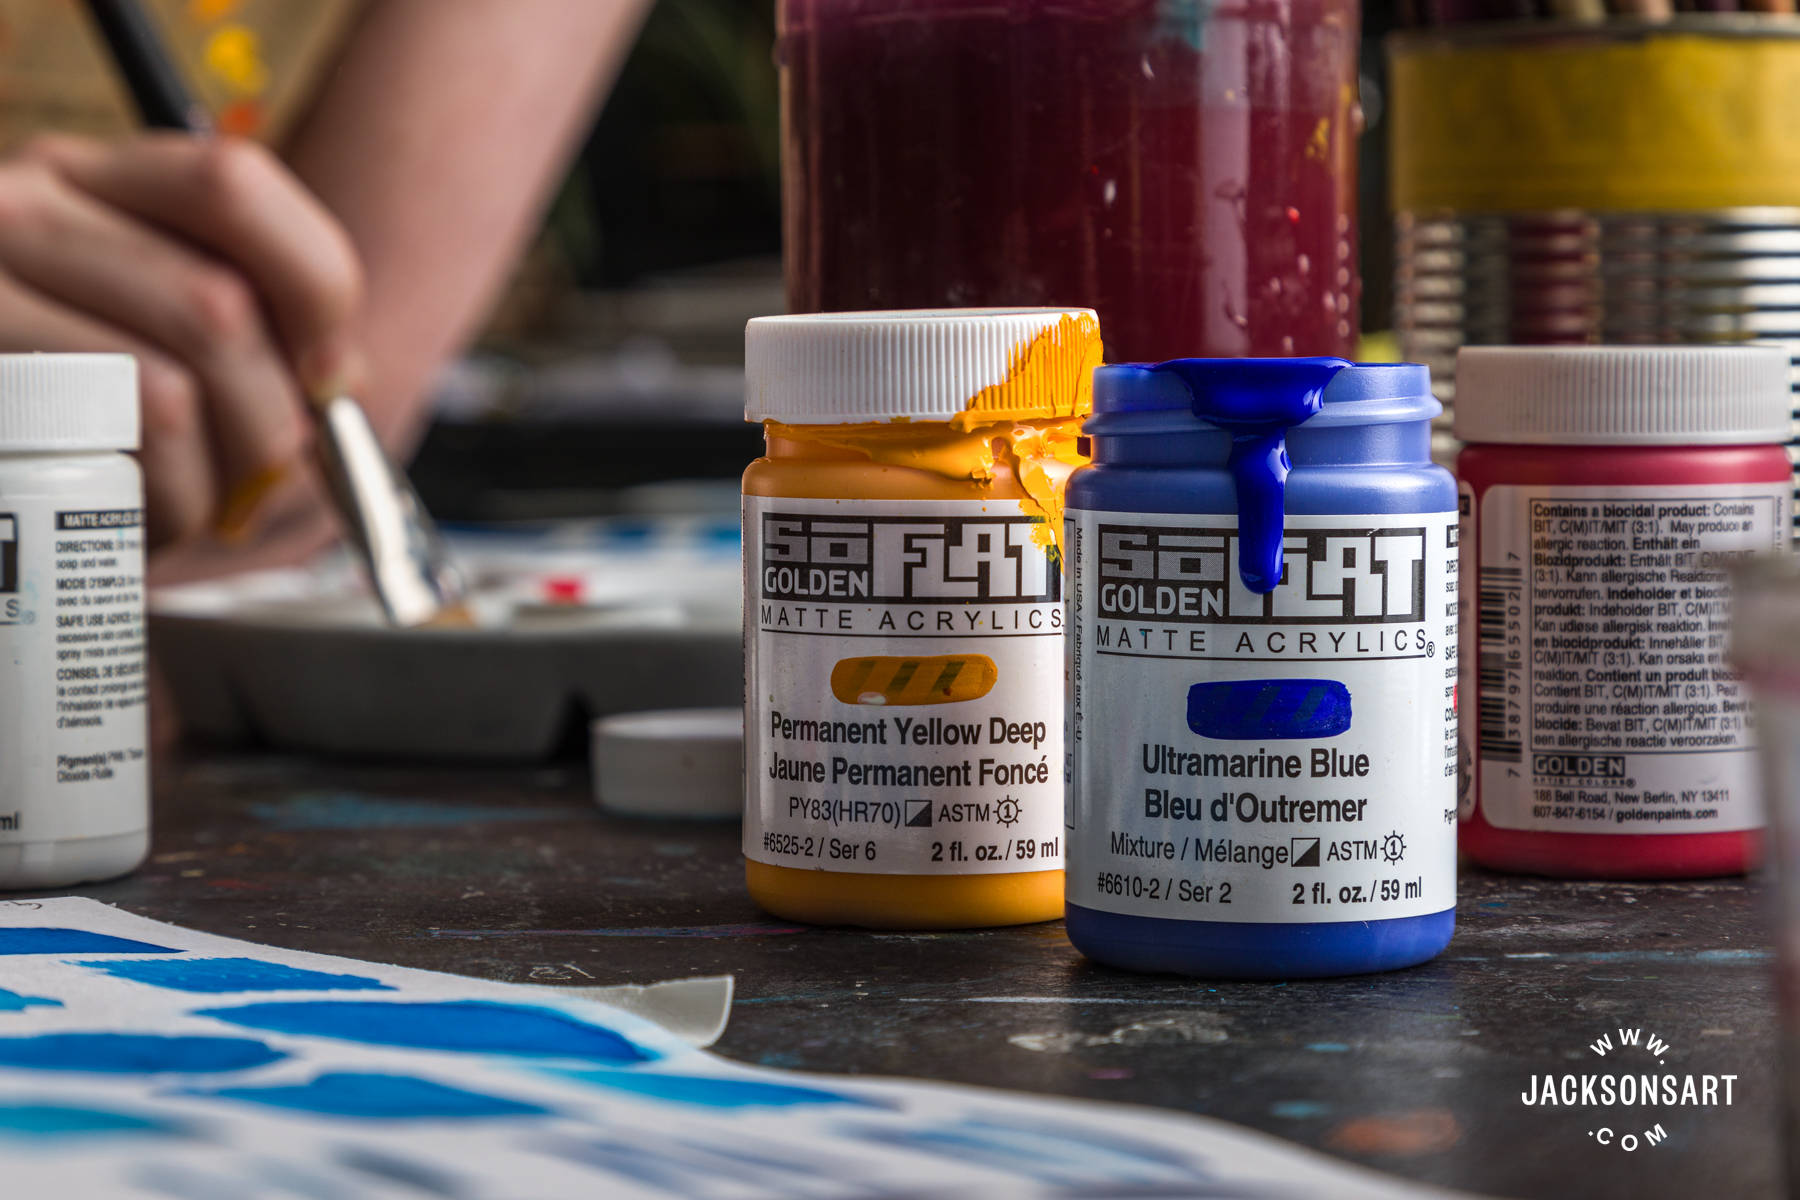 ACRYLIC PAINT - MAT, Acrylic paints, PAINTS - Acrylic paints, ACRYLIC PAINT  - MAT, Acrylic paints are water-based quick-drying paints, with good  coverage and easy to use. They can be applied